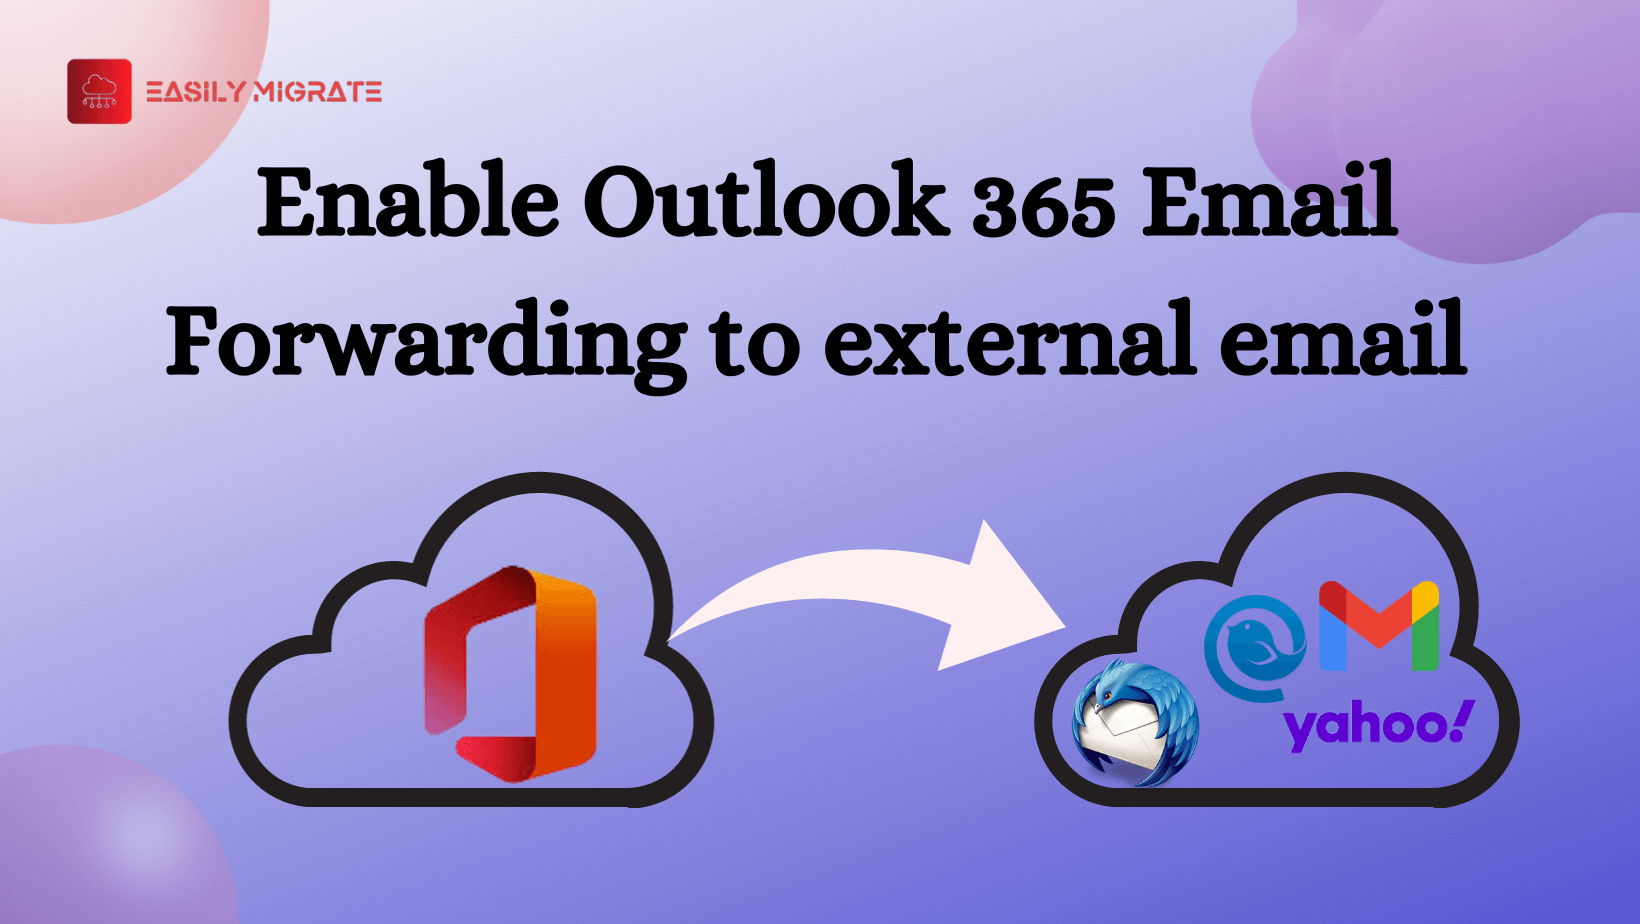 How to enable Outlook 365 Email Forwarding to external email